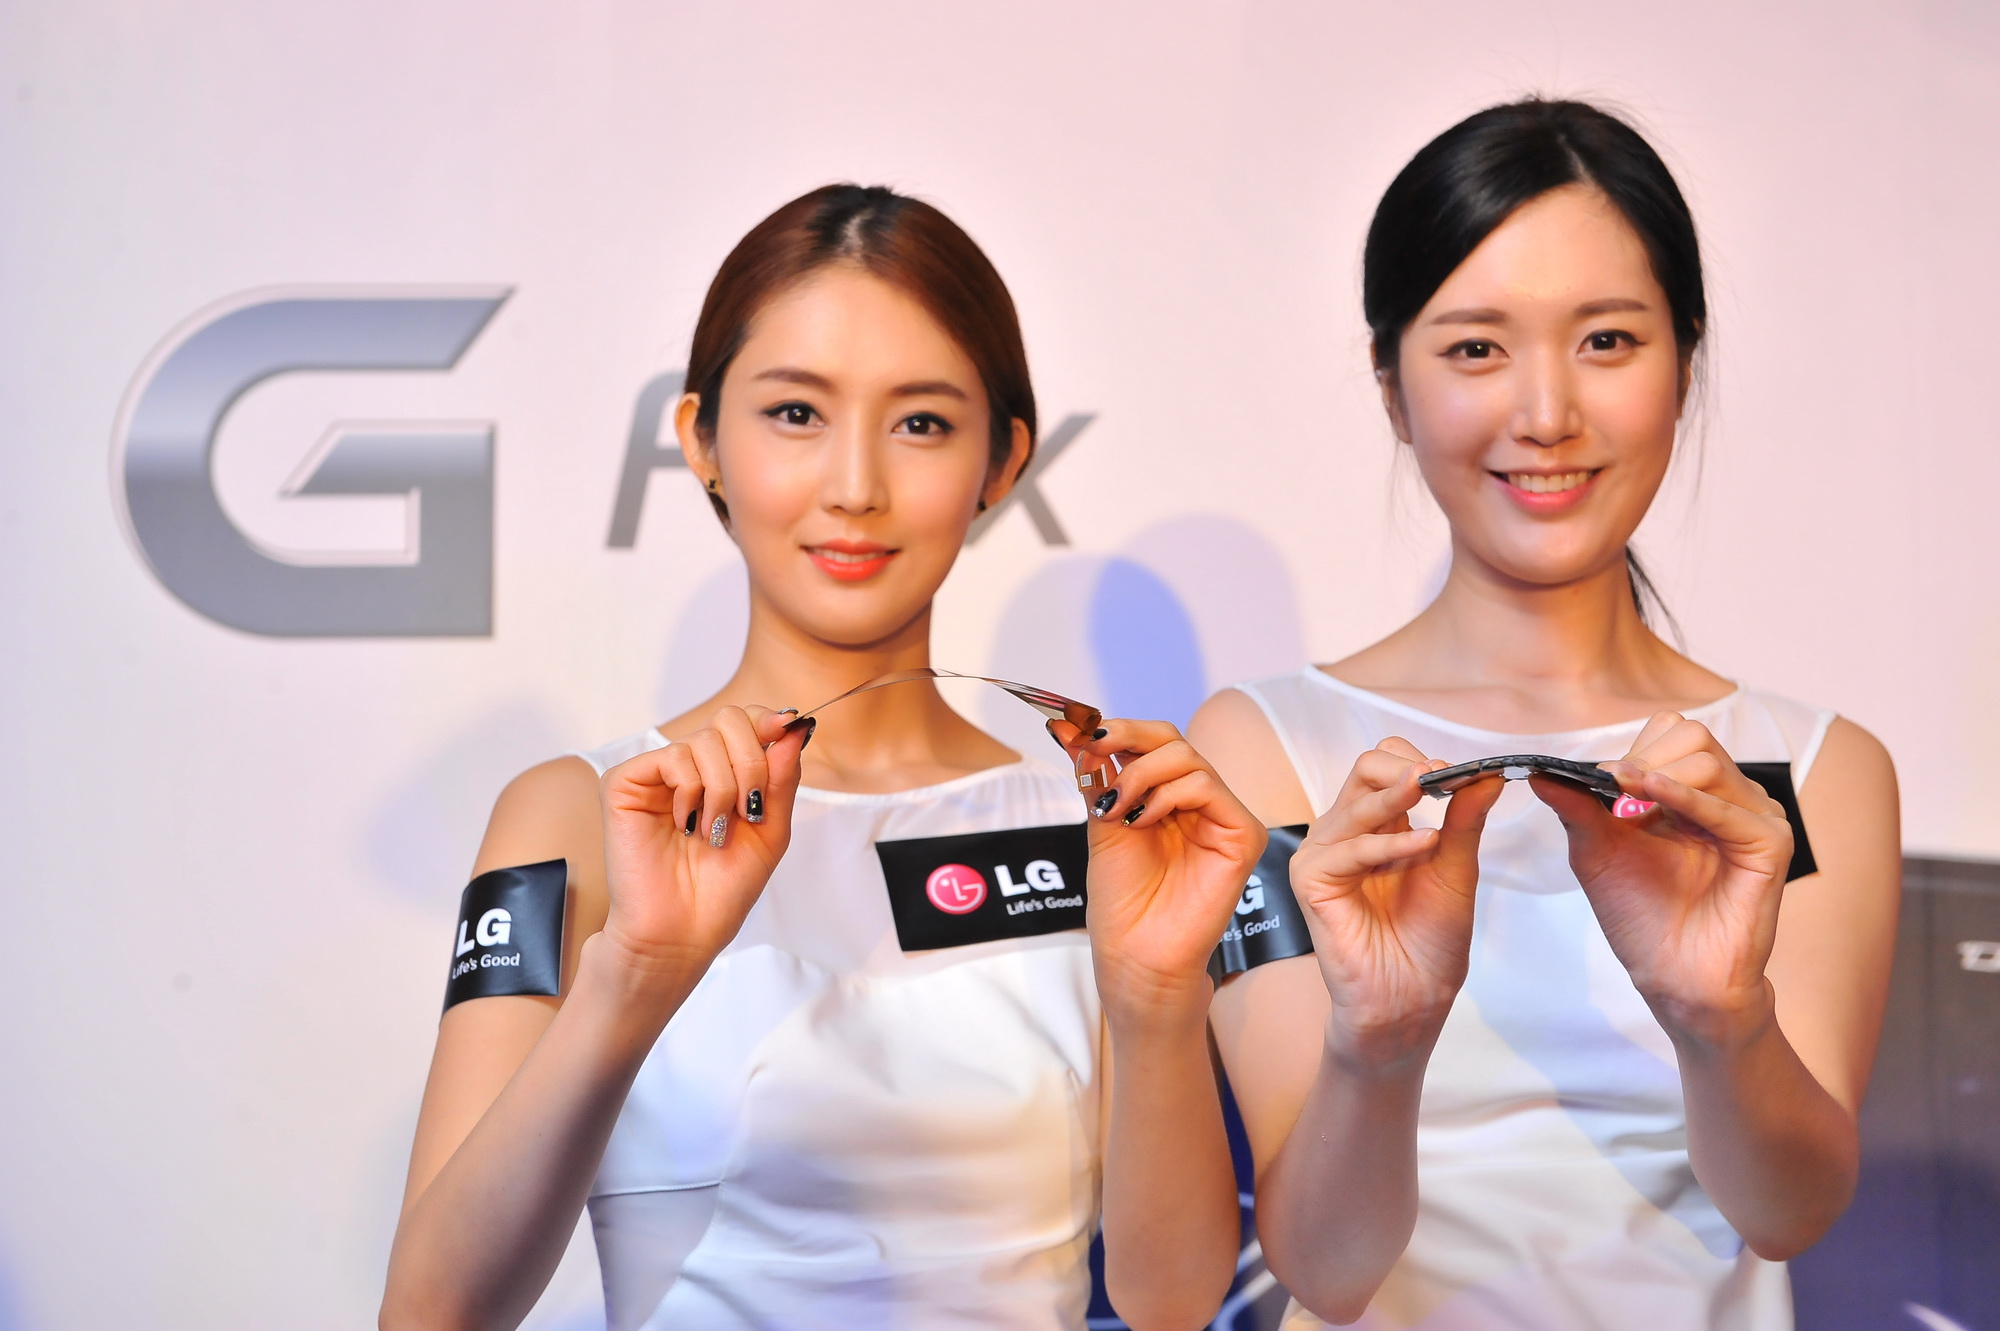 From left to right; two models are showing how the P-OLED HD display of LG G Flex and the LG G Flex are curved.